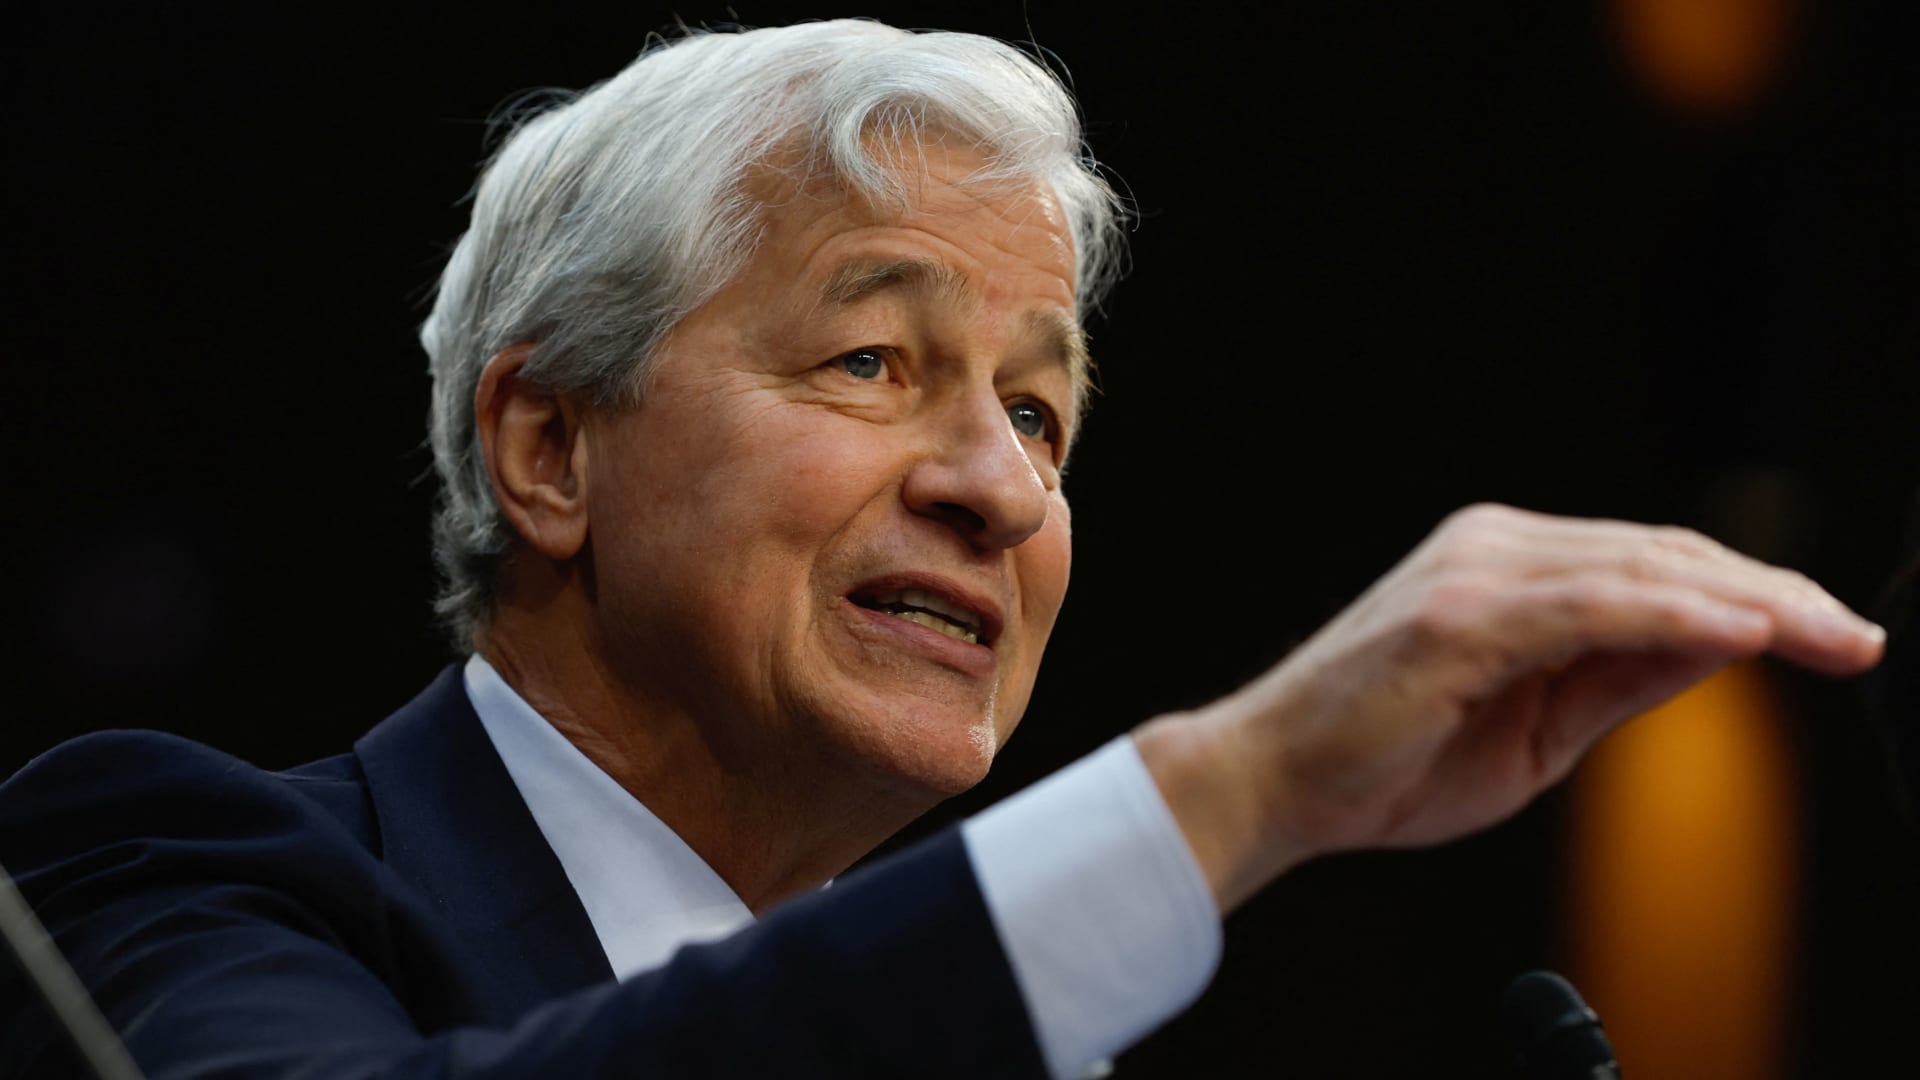 JPMorgan Chase CEO and Chairman Jamie Dimon gestures as he speaks during the U.S. Senate Banking, Housing and Urban Affairs Committee oversight hearing on Wall Street firms, on Capitol Hill in Washington, D.C.